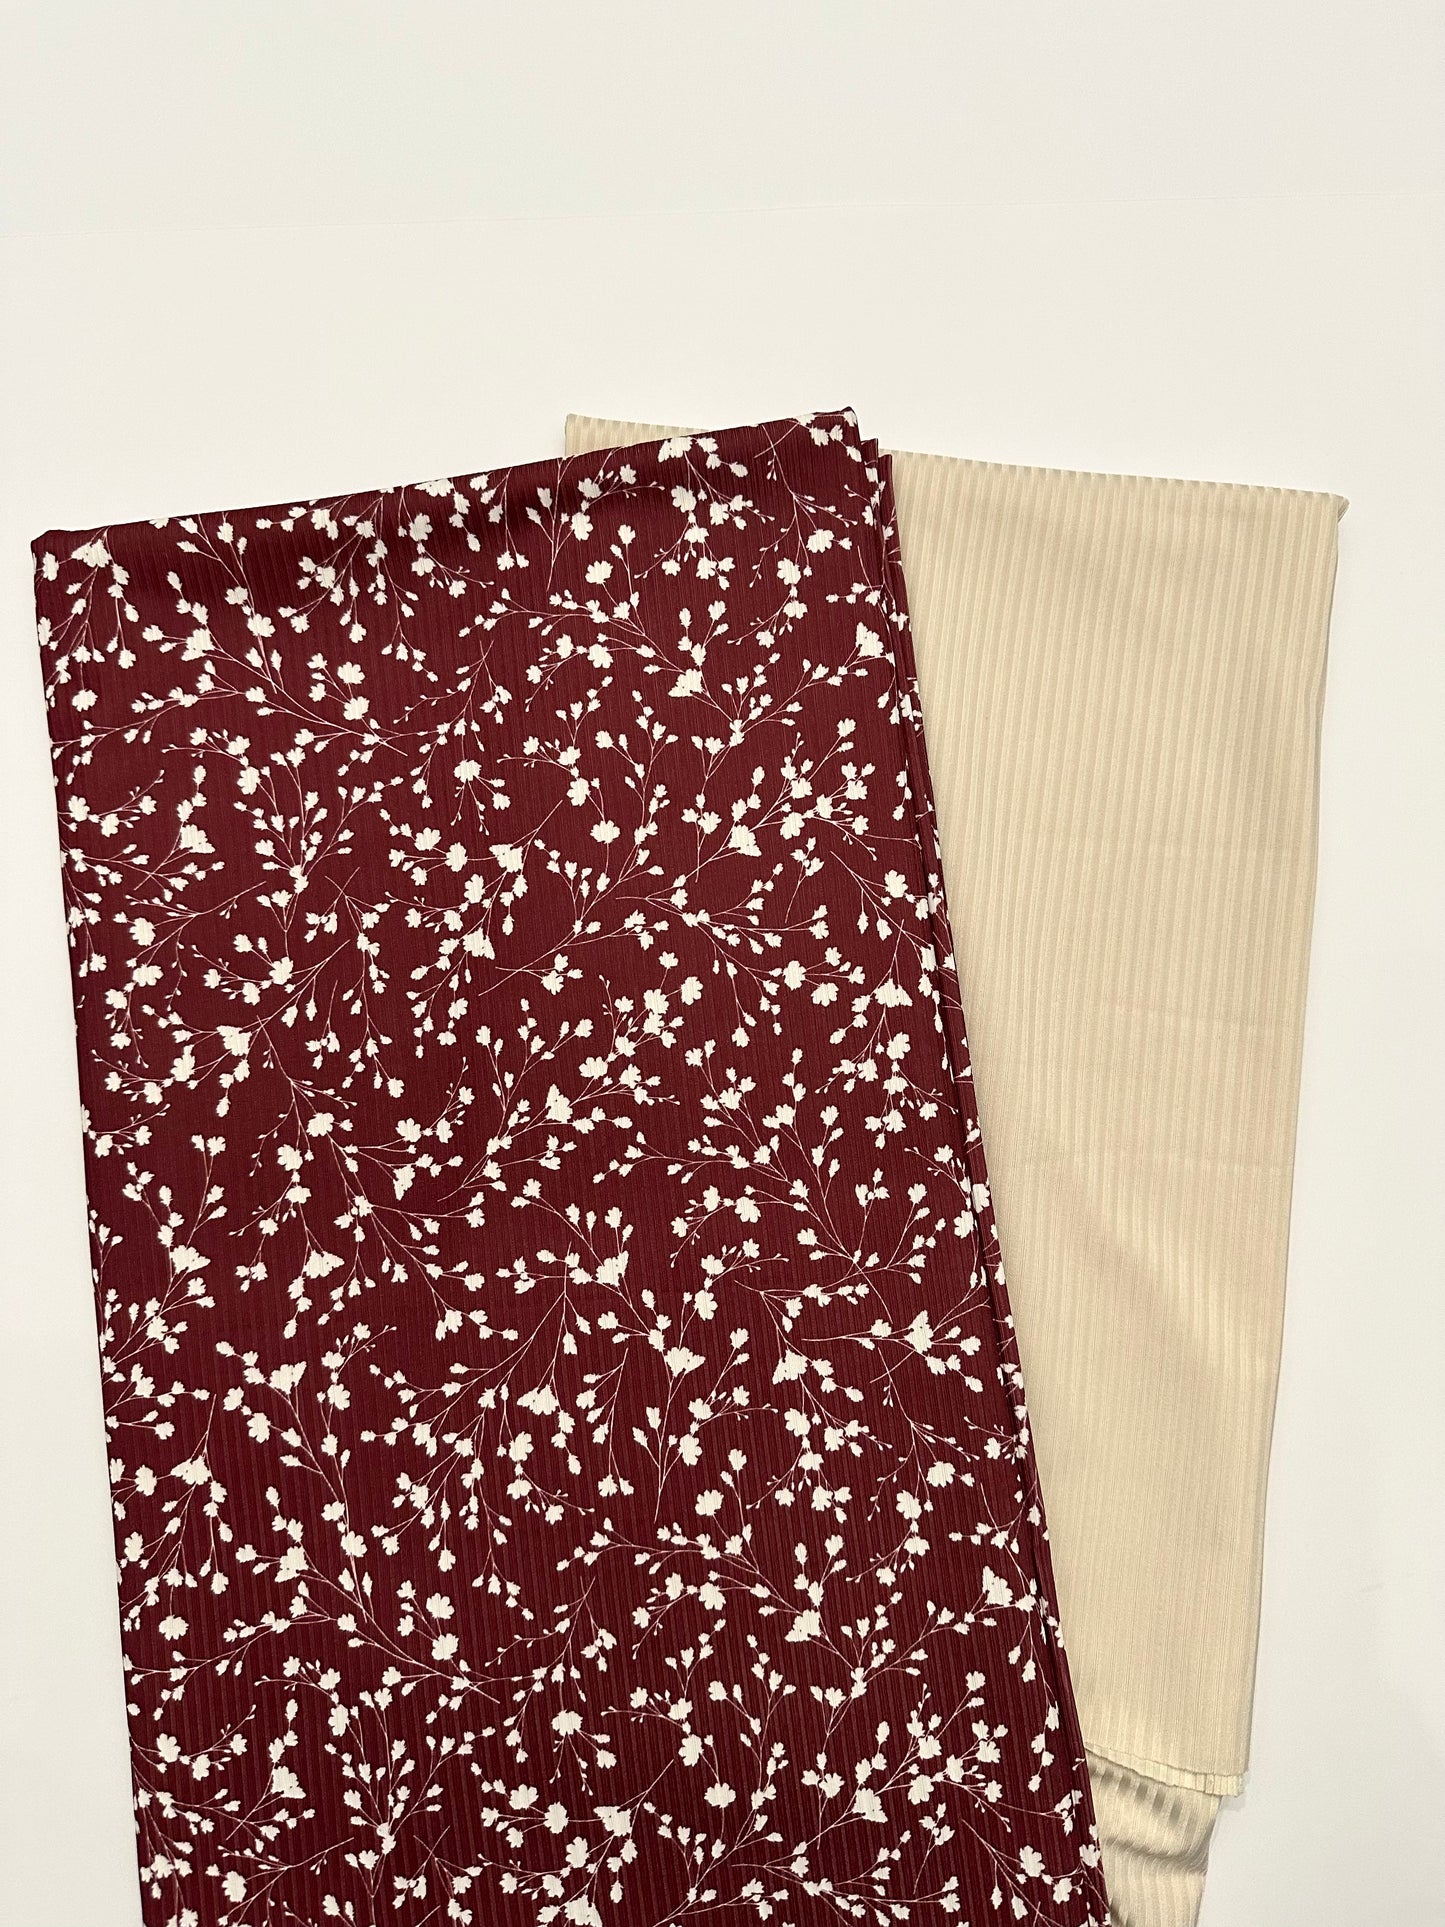 Harper Floral in Burgundy on Unbrushed Rib Knit Fabric Sold by the 1/4 yard